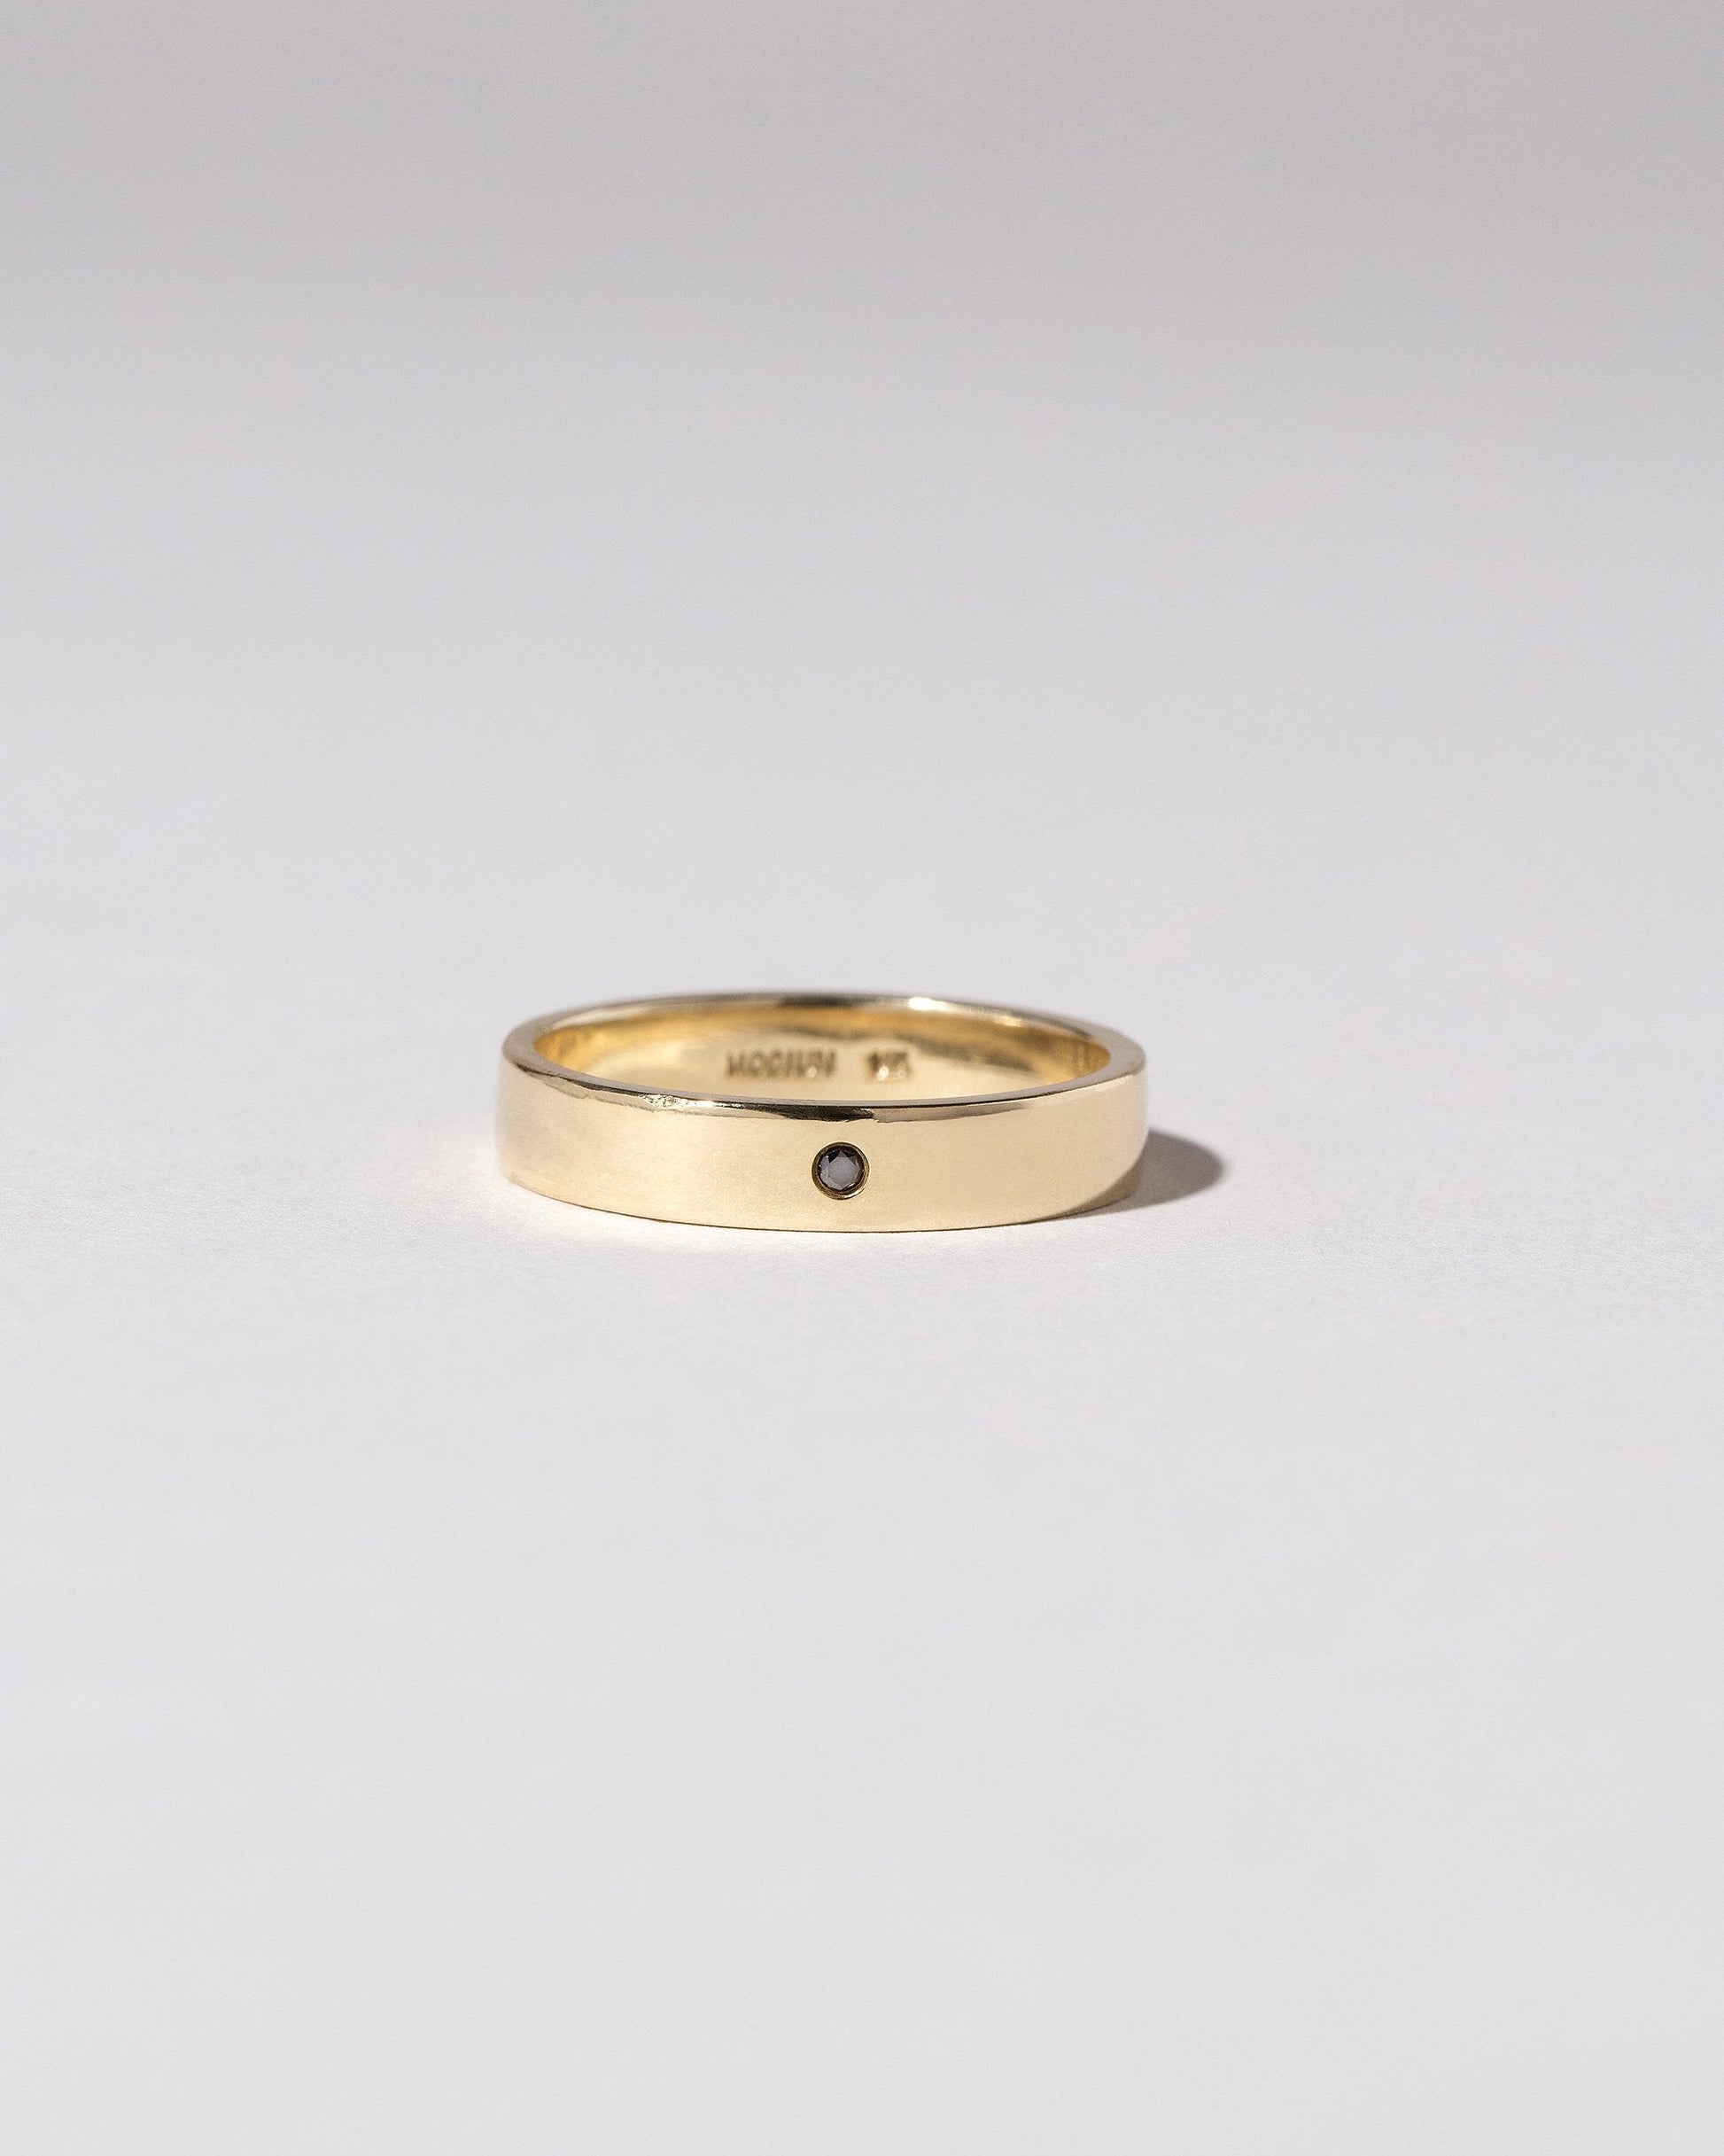 Closeup detail of the Gold 4mm Square Wire Band with Single Stone Black Diamond 1.6mm added on light color background.